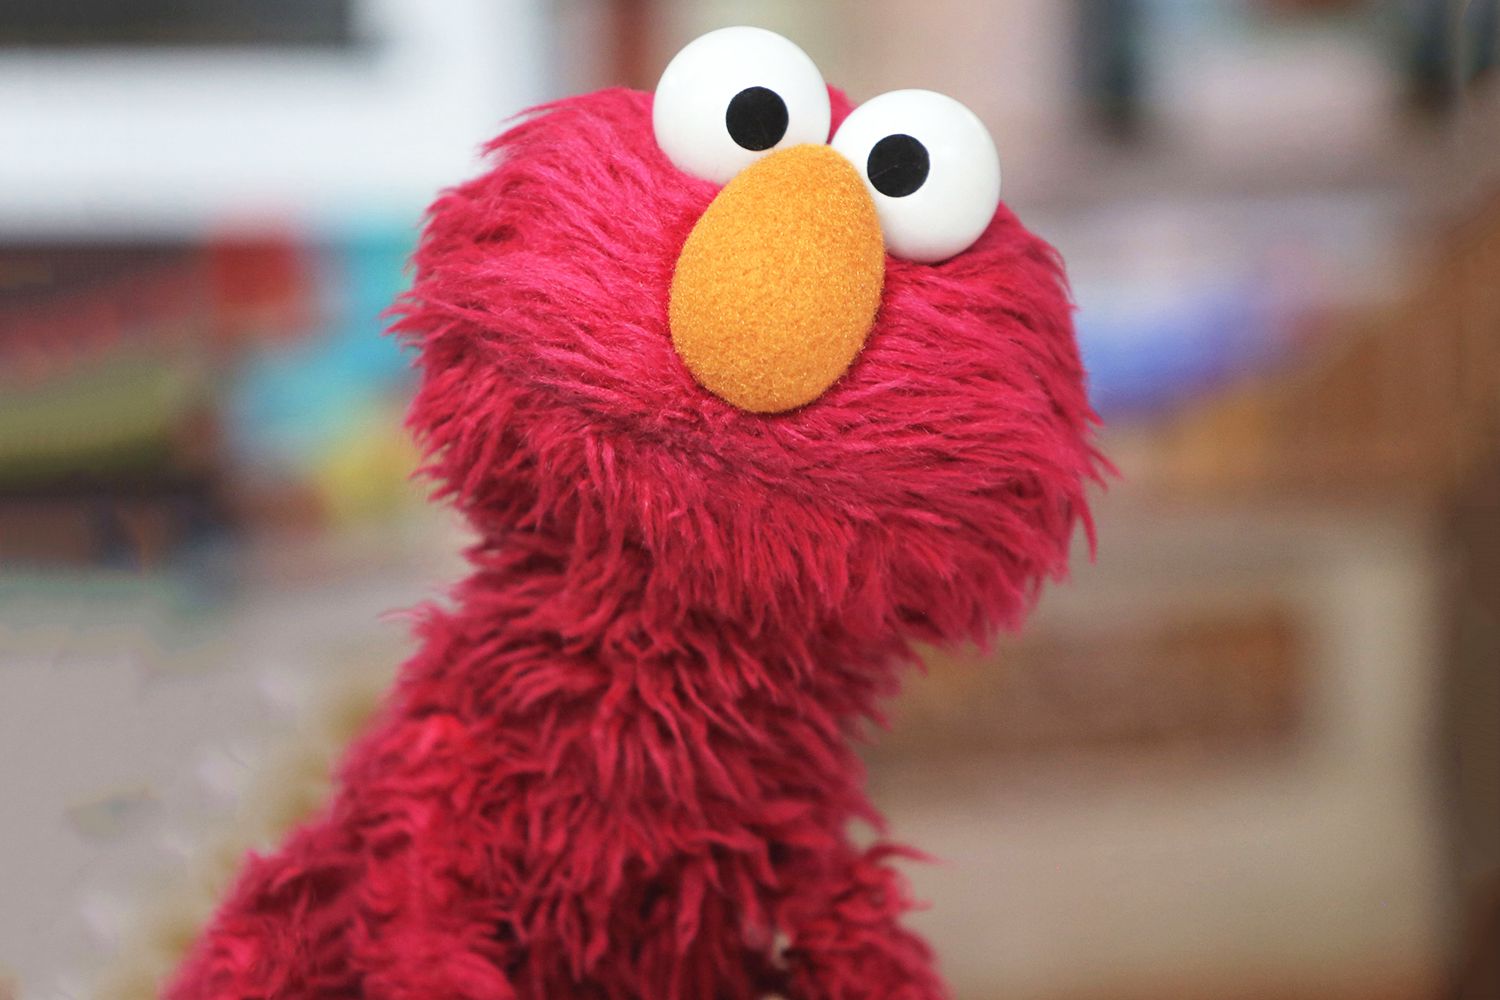 Photo of Elmo, a red hairy monster muppet with an orange nose